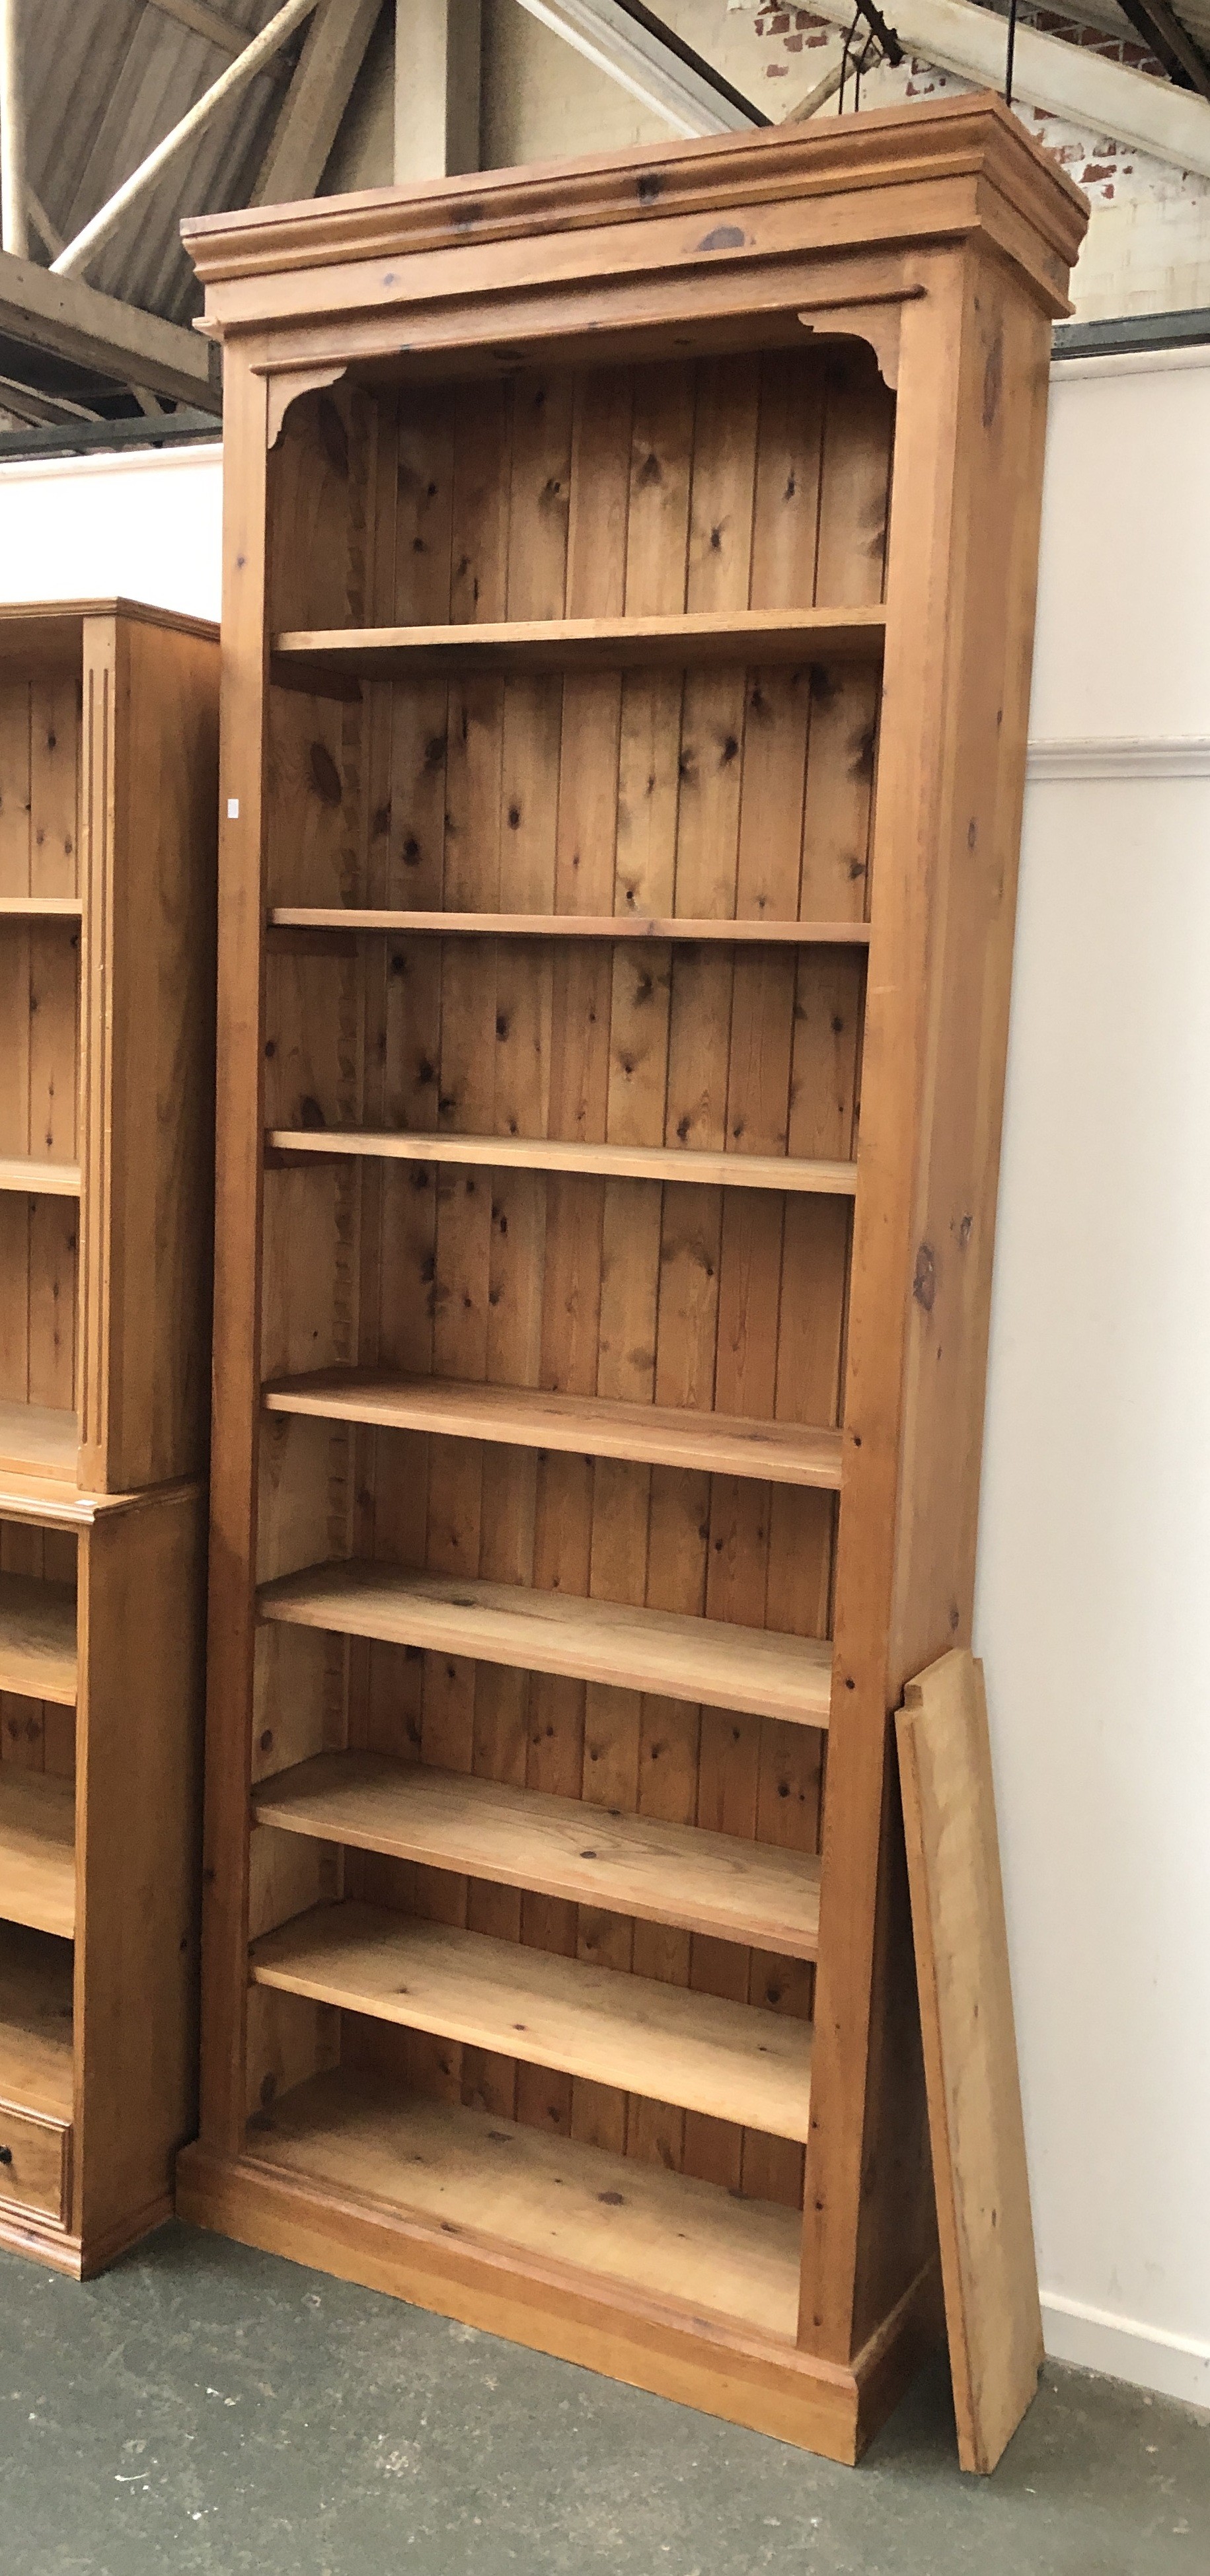 A very tall pine bookcase with seven adjustable shelves, 105x28x260cmH